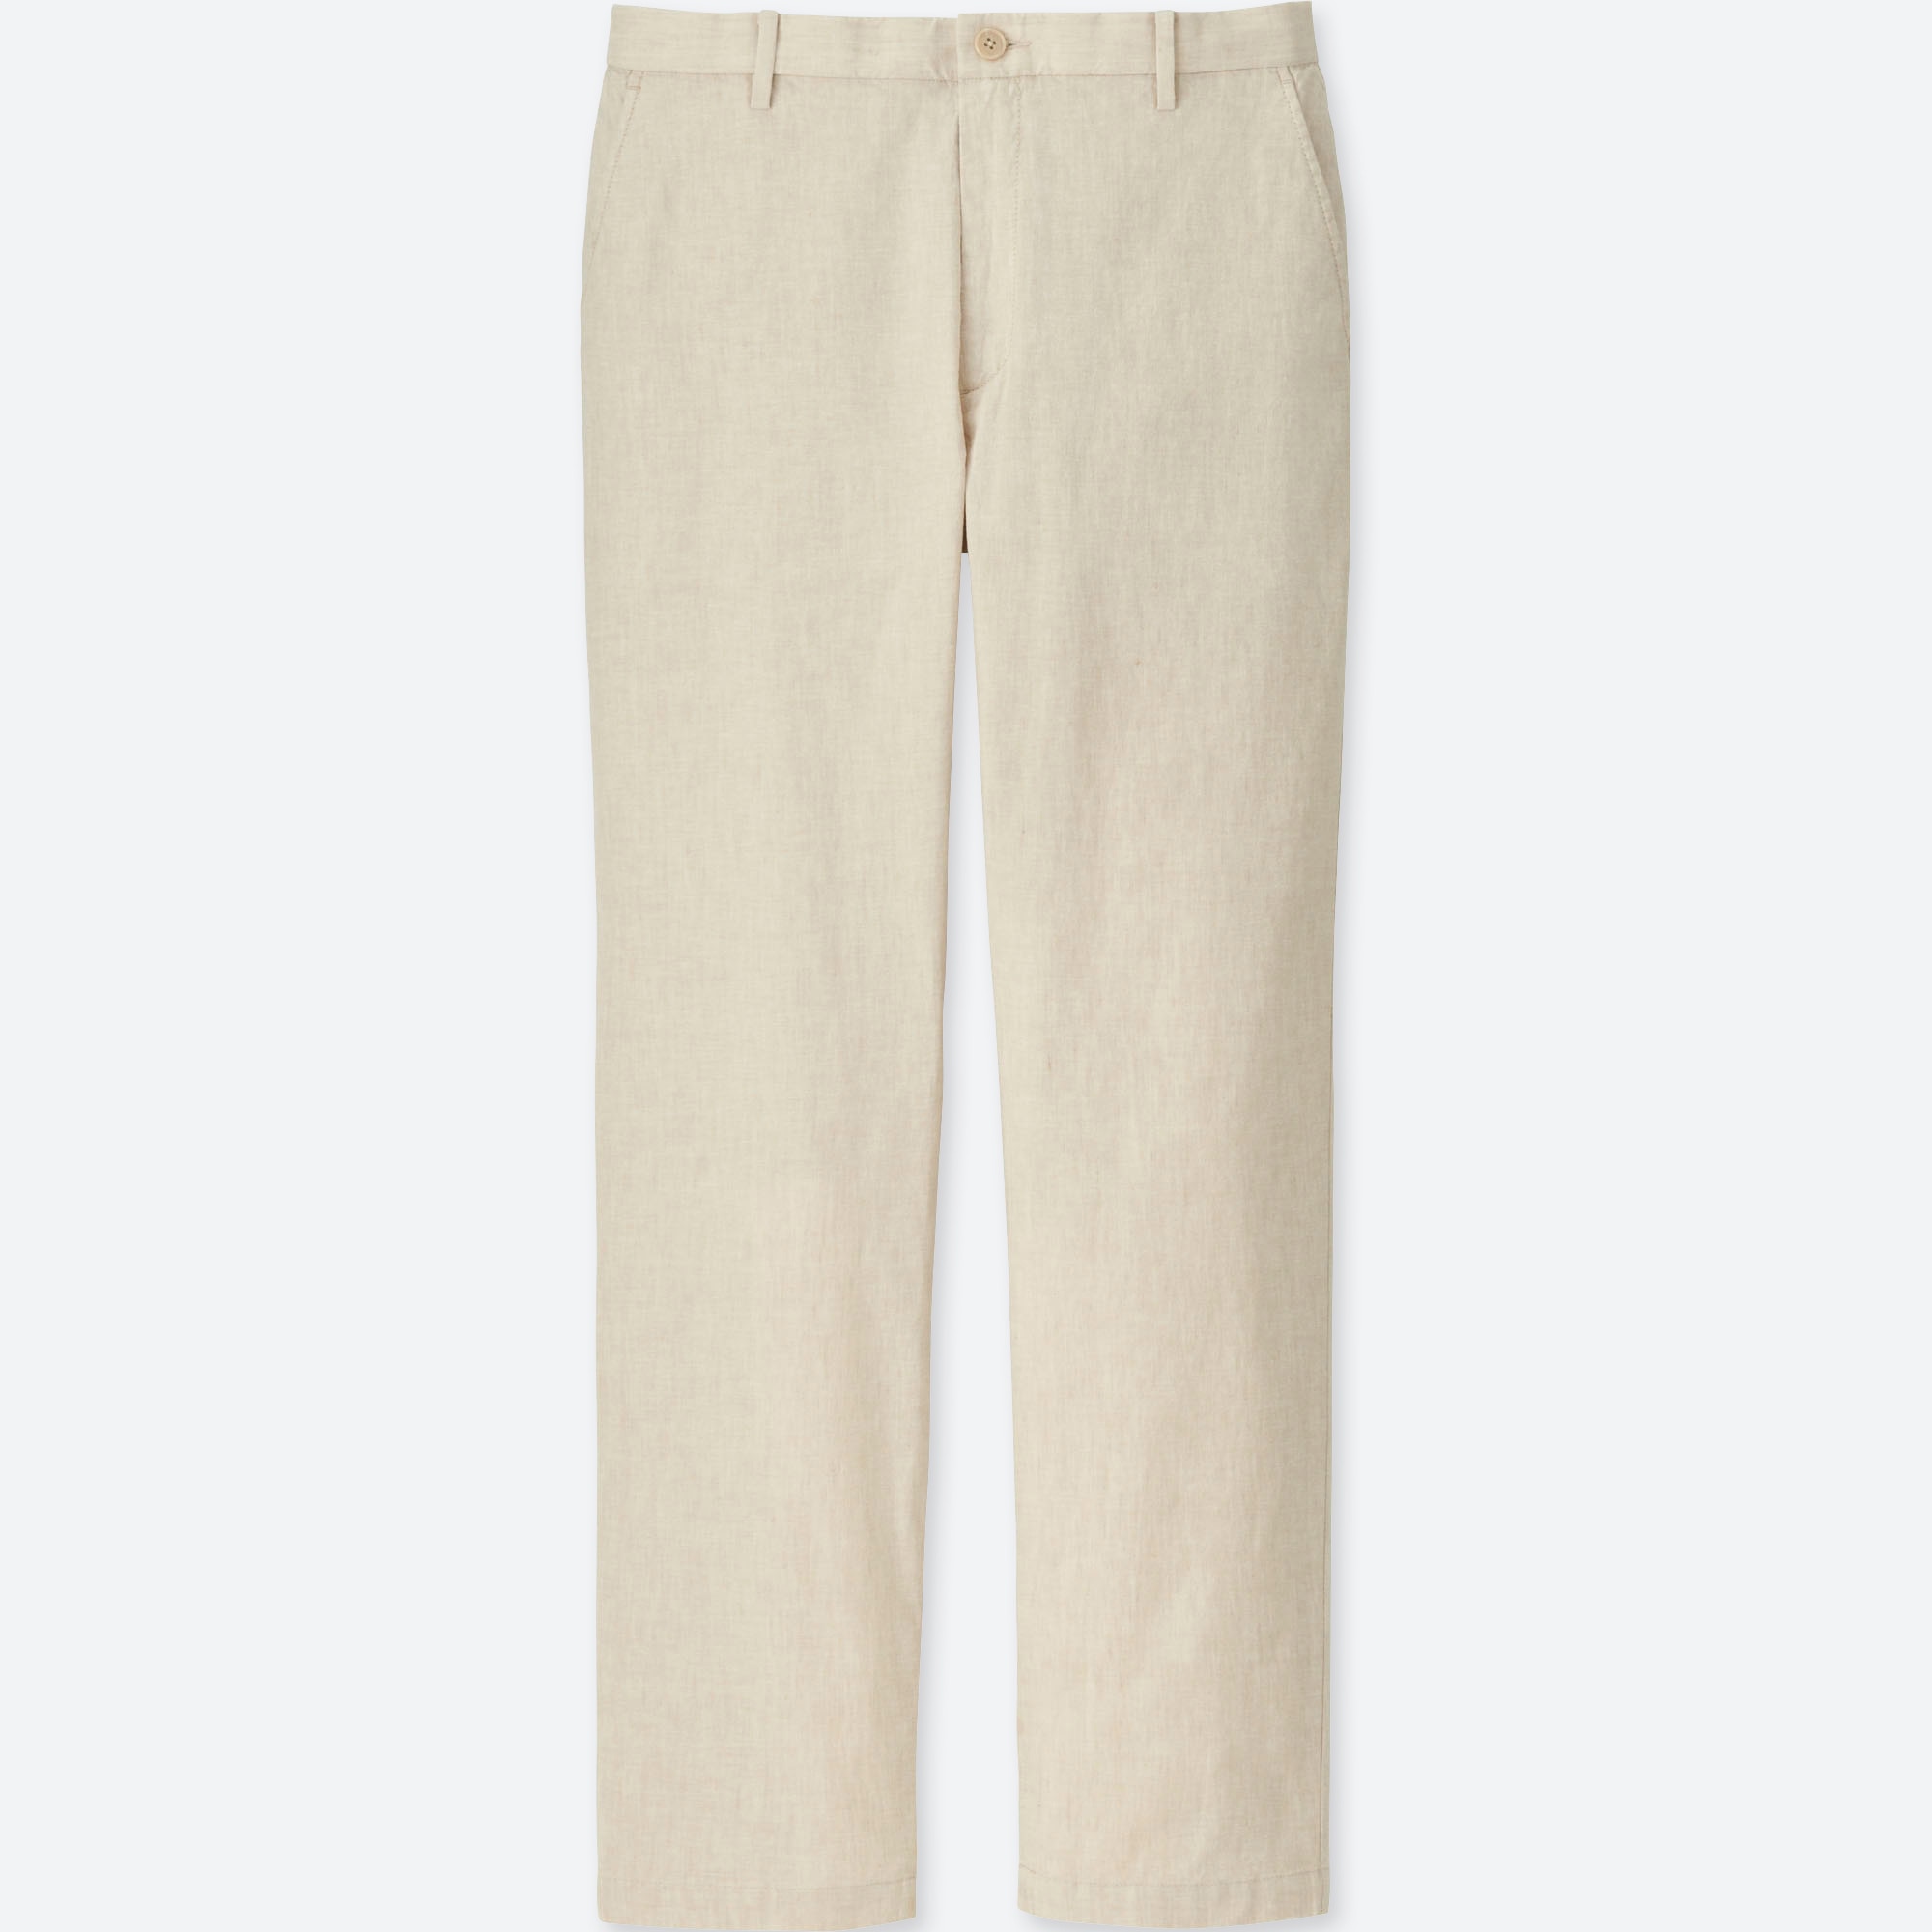 Buy CELIO Caramel Solid Cotton Relaxed Fit Men's Casual Trousers | Shoppers  Stop